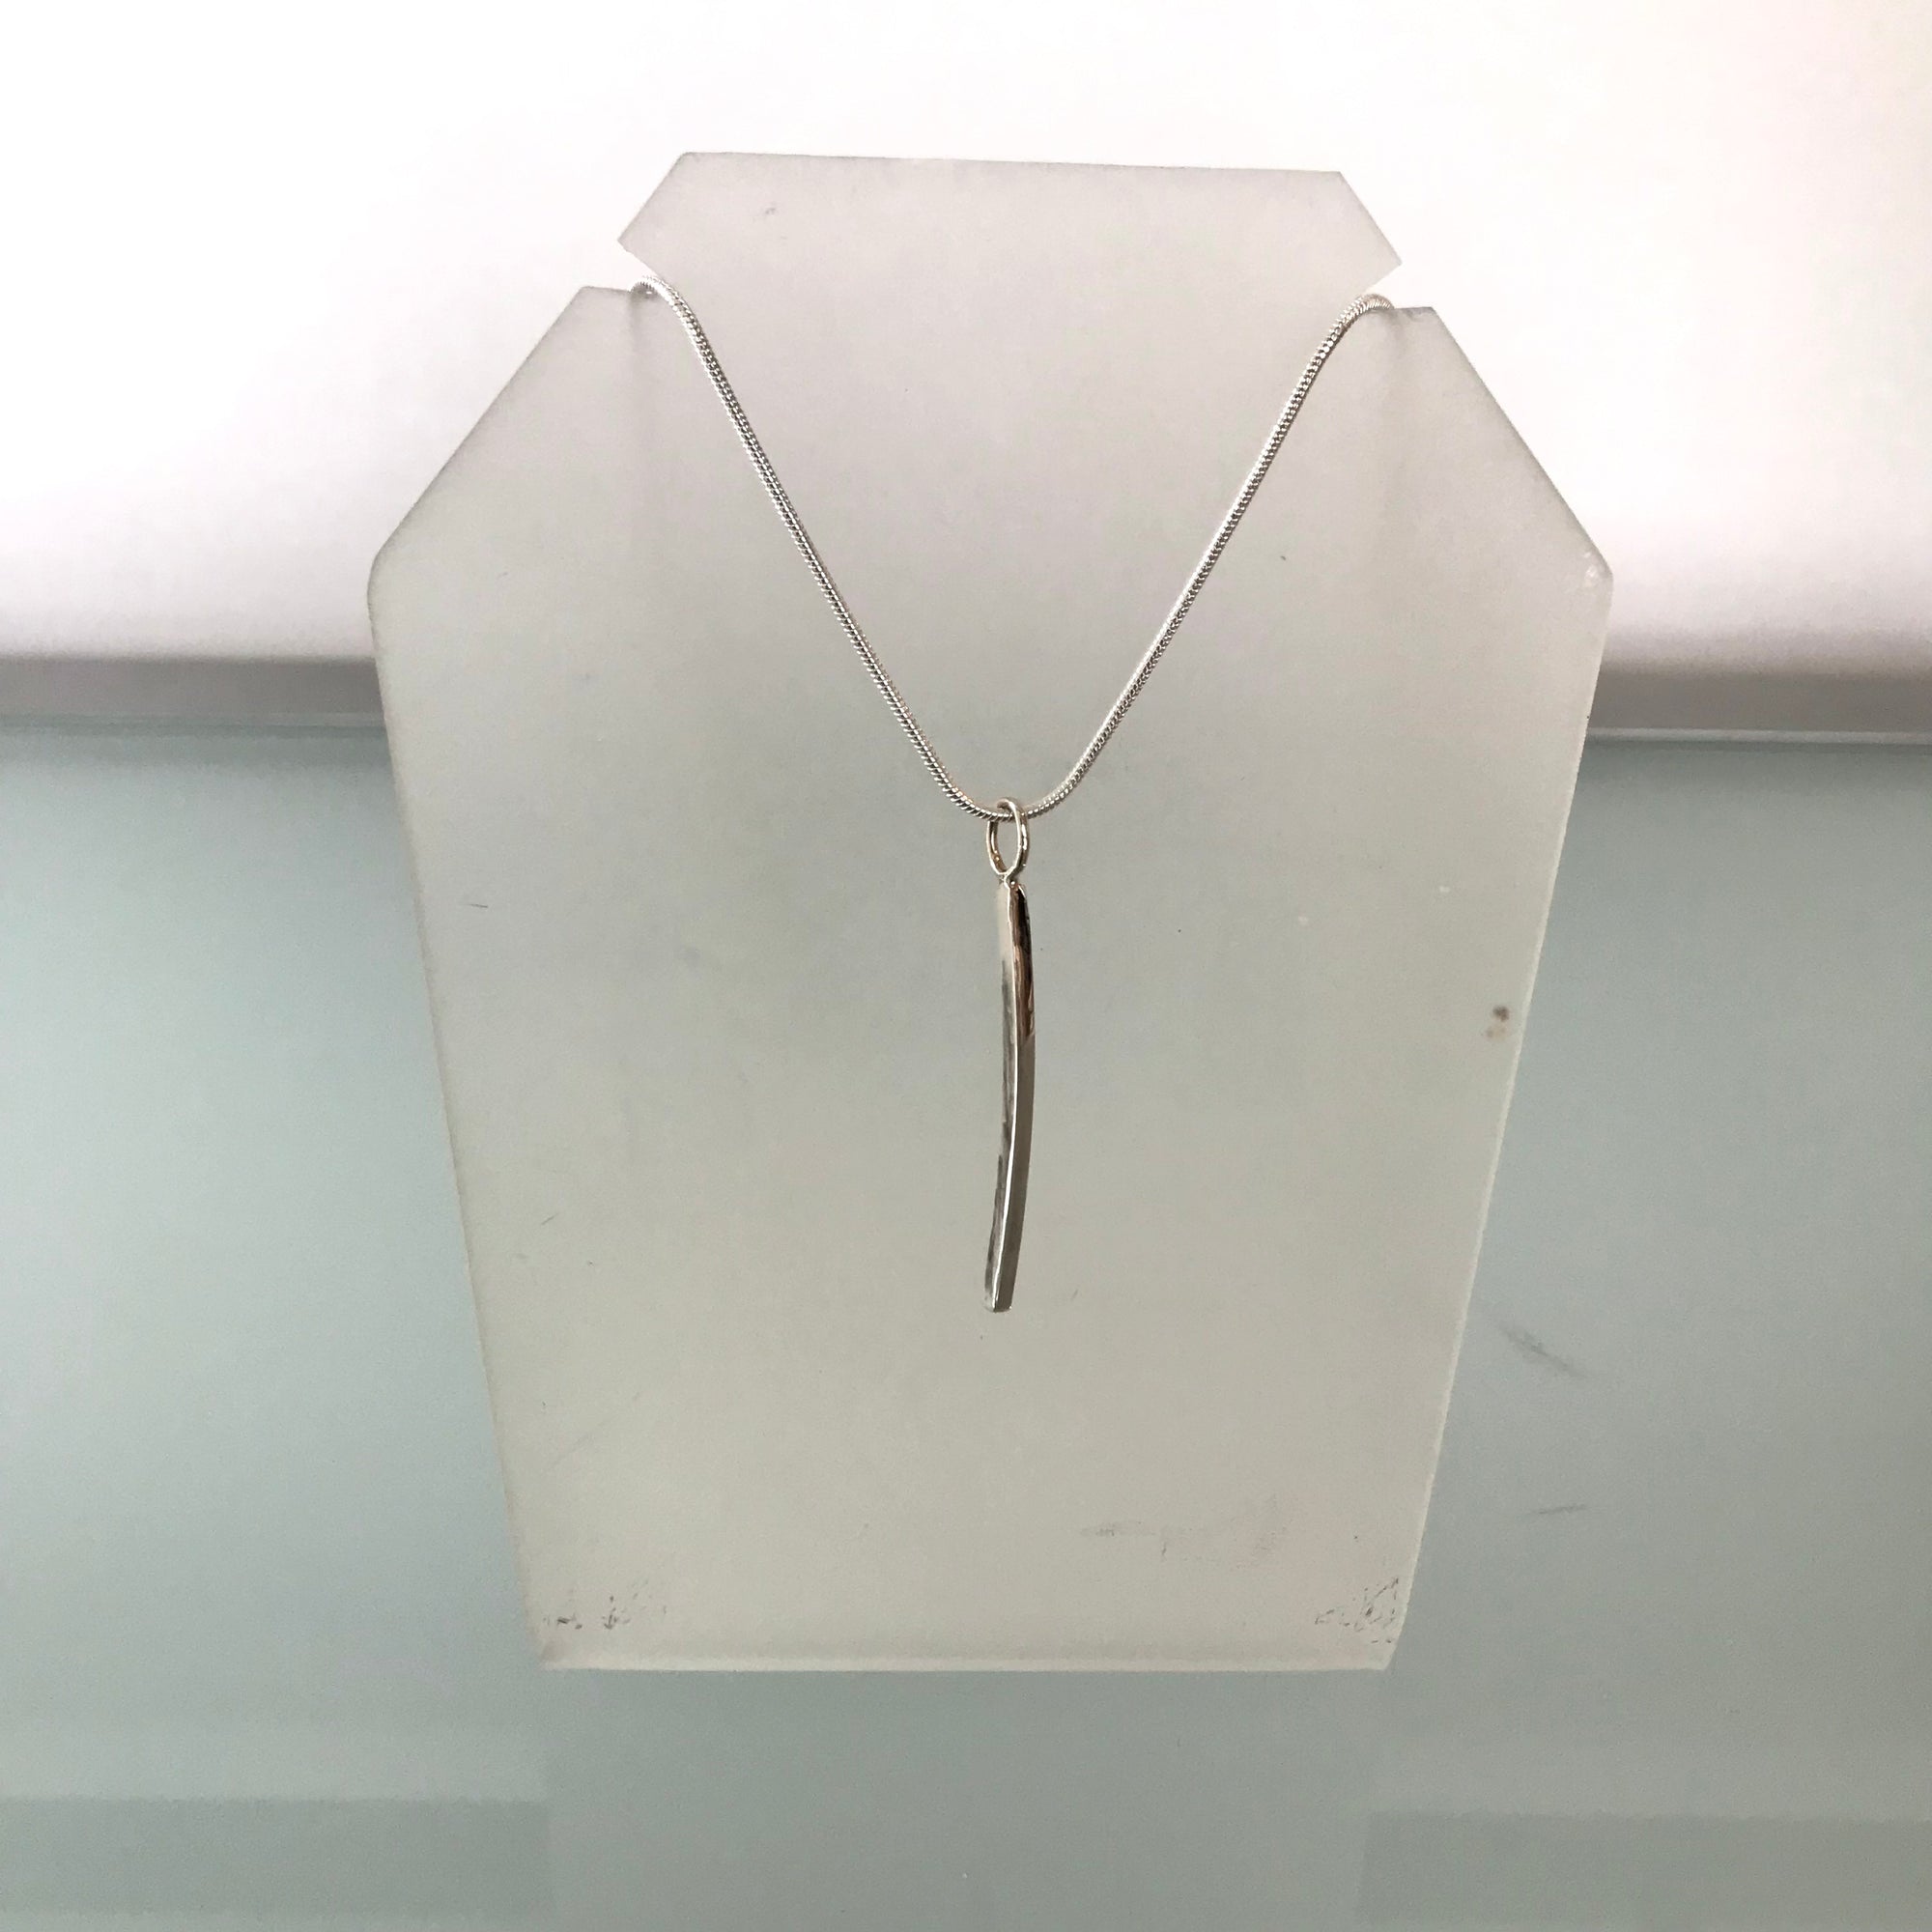 Jonathan Rout -  Necklace - Silver Bar